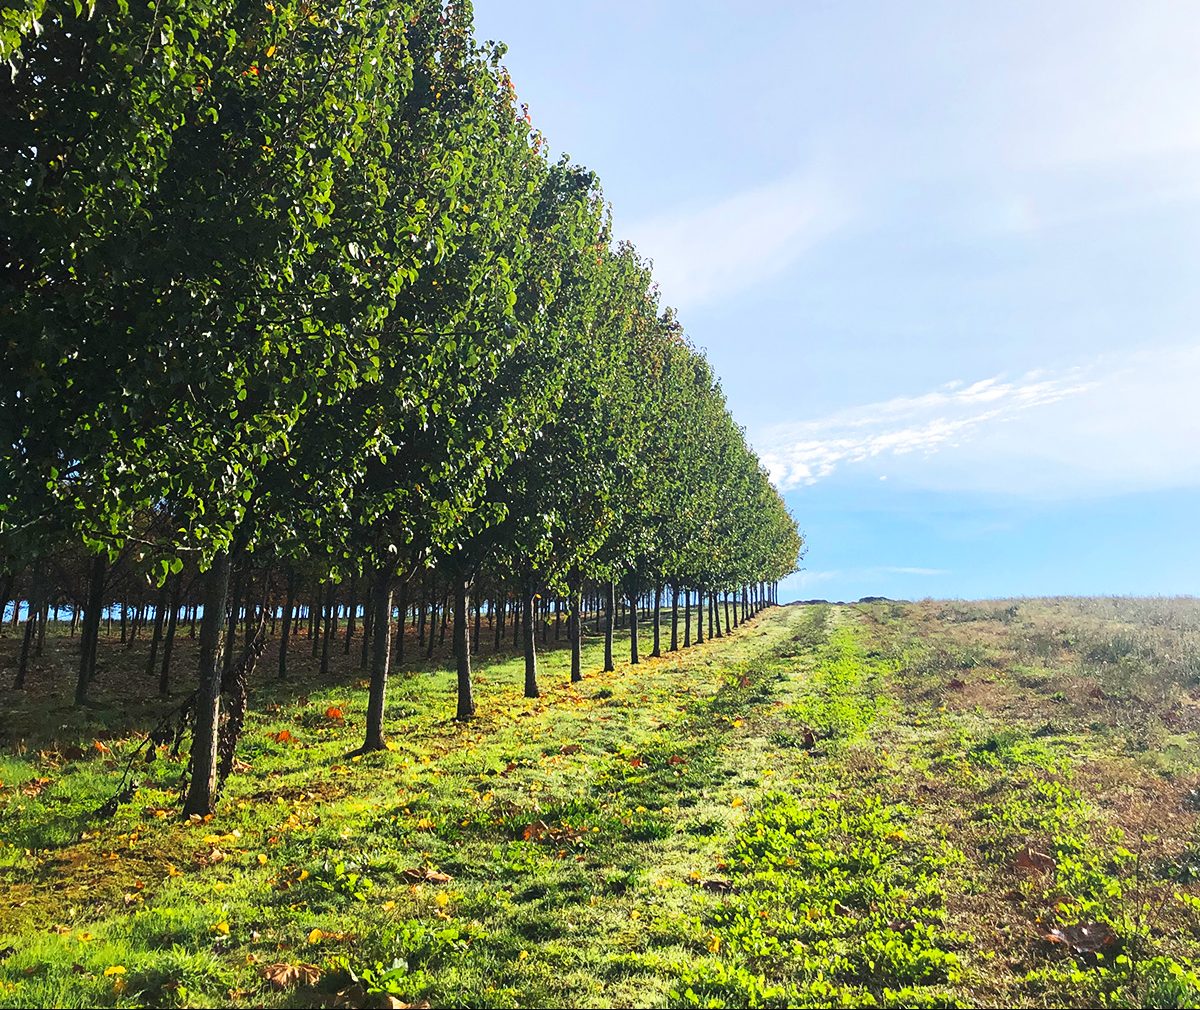 A row of closely planted, advanced field dug trees under a blue sky with an open grassy field on the right side.